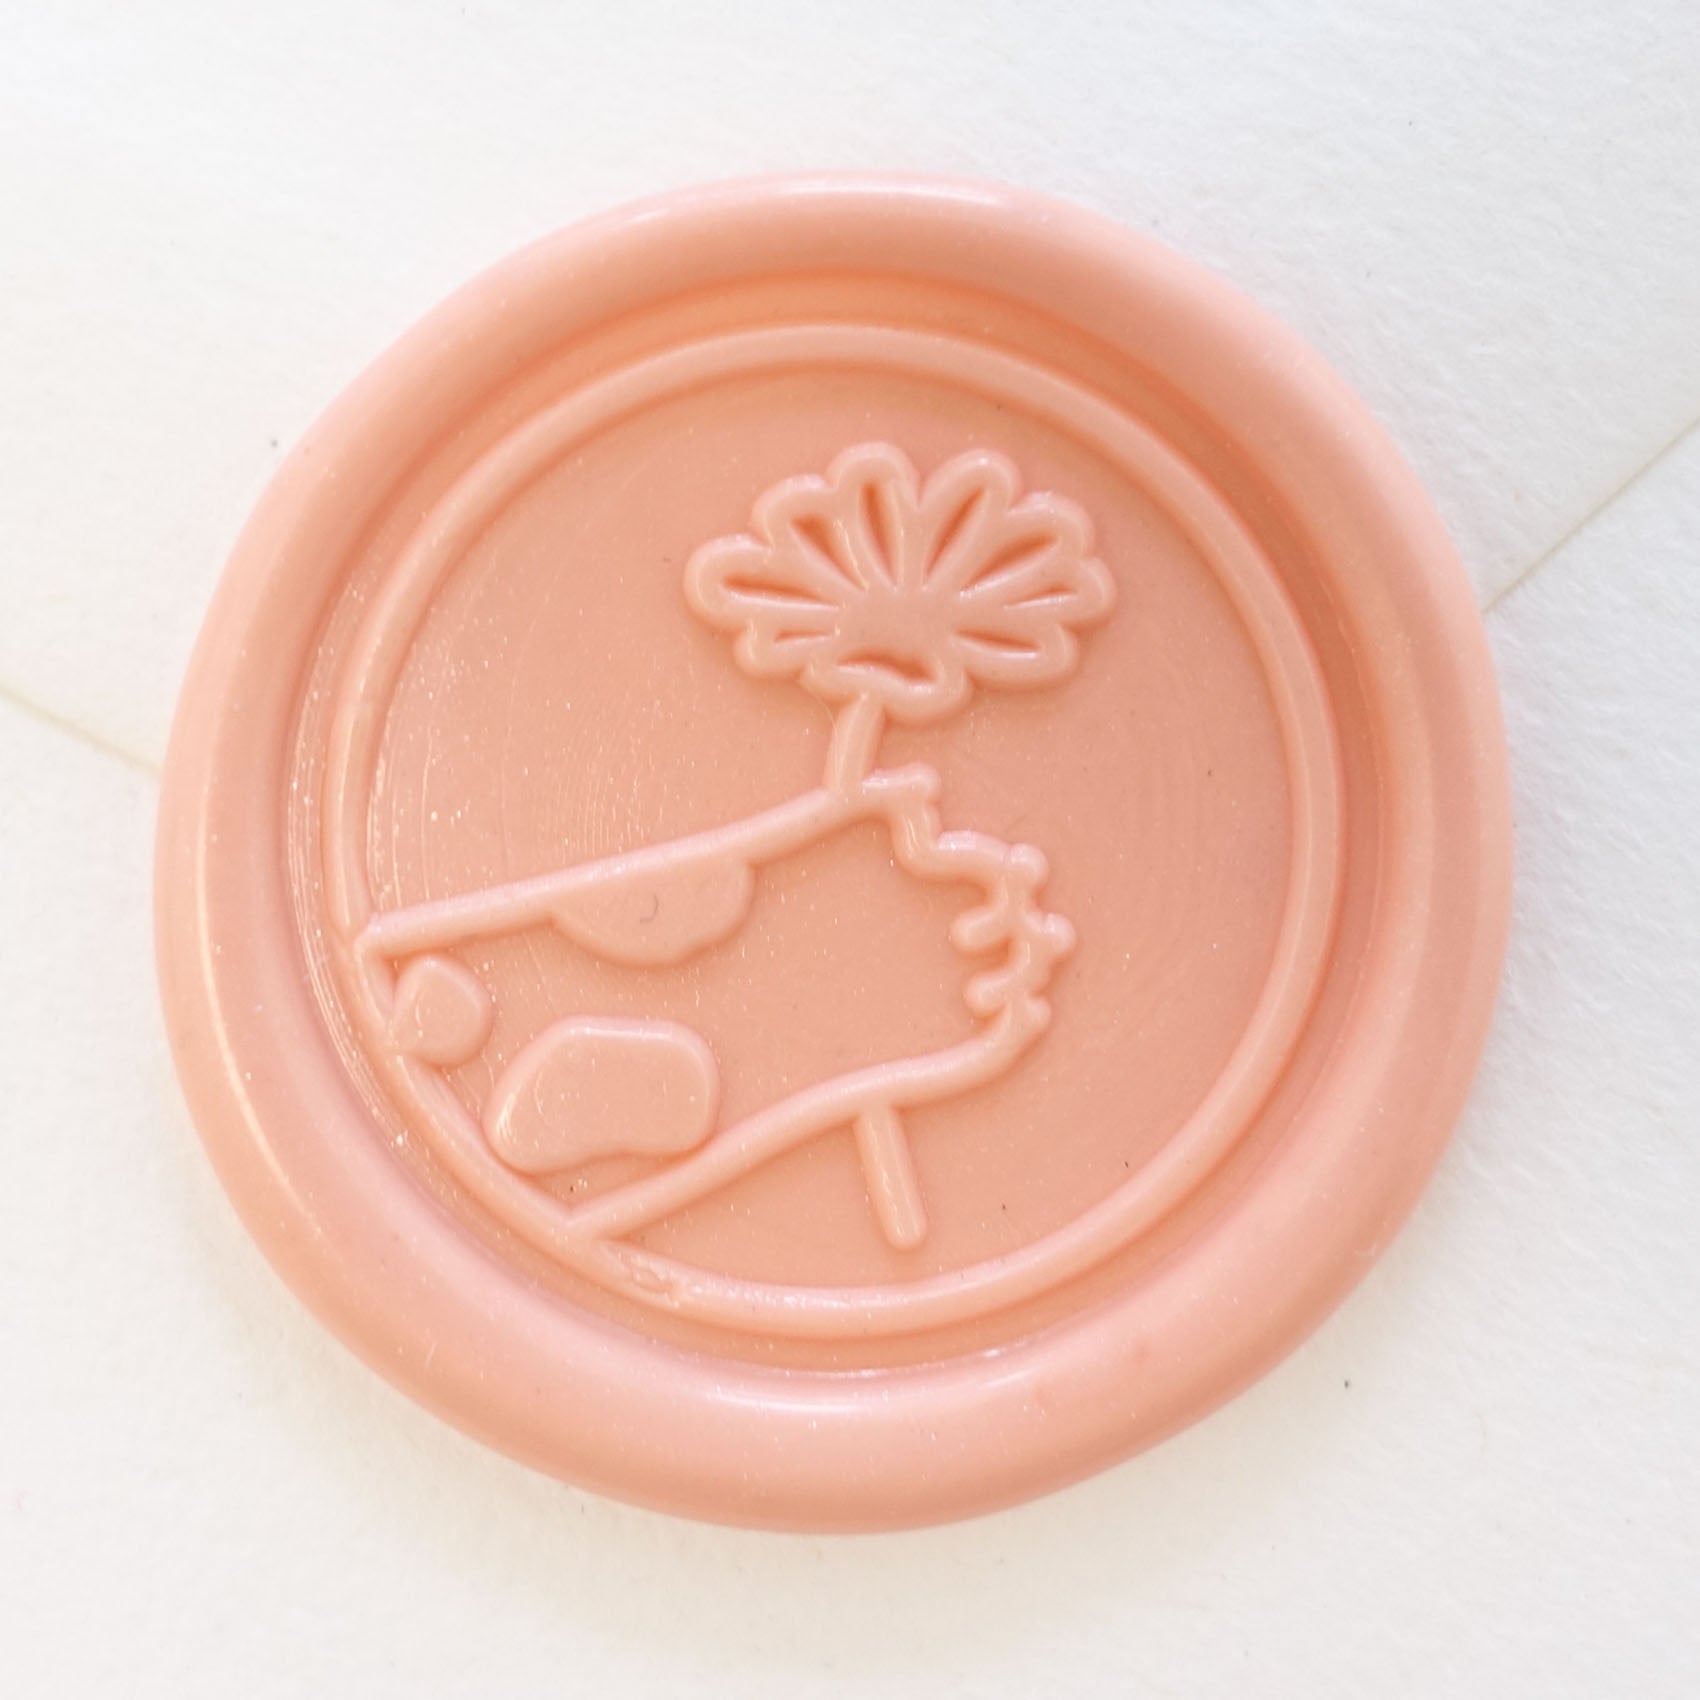 cat paw holding flower clear wax seal on envelope fiona ariva australia